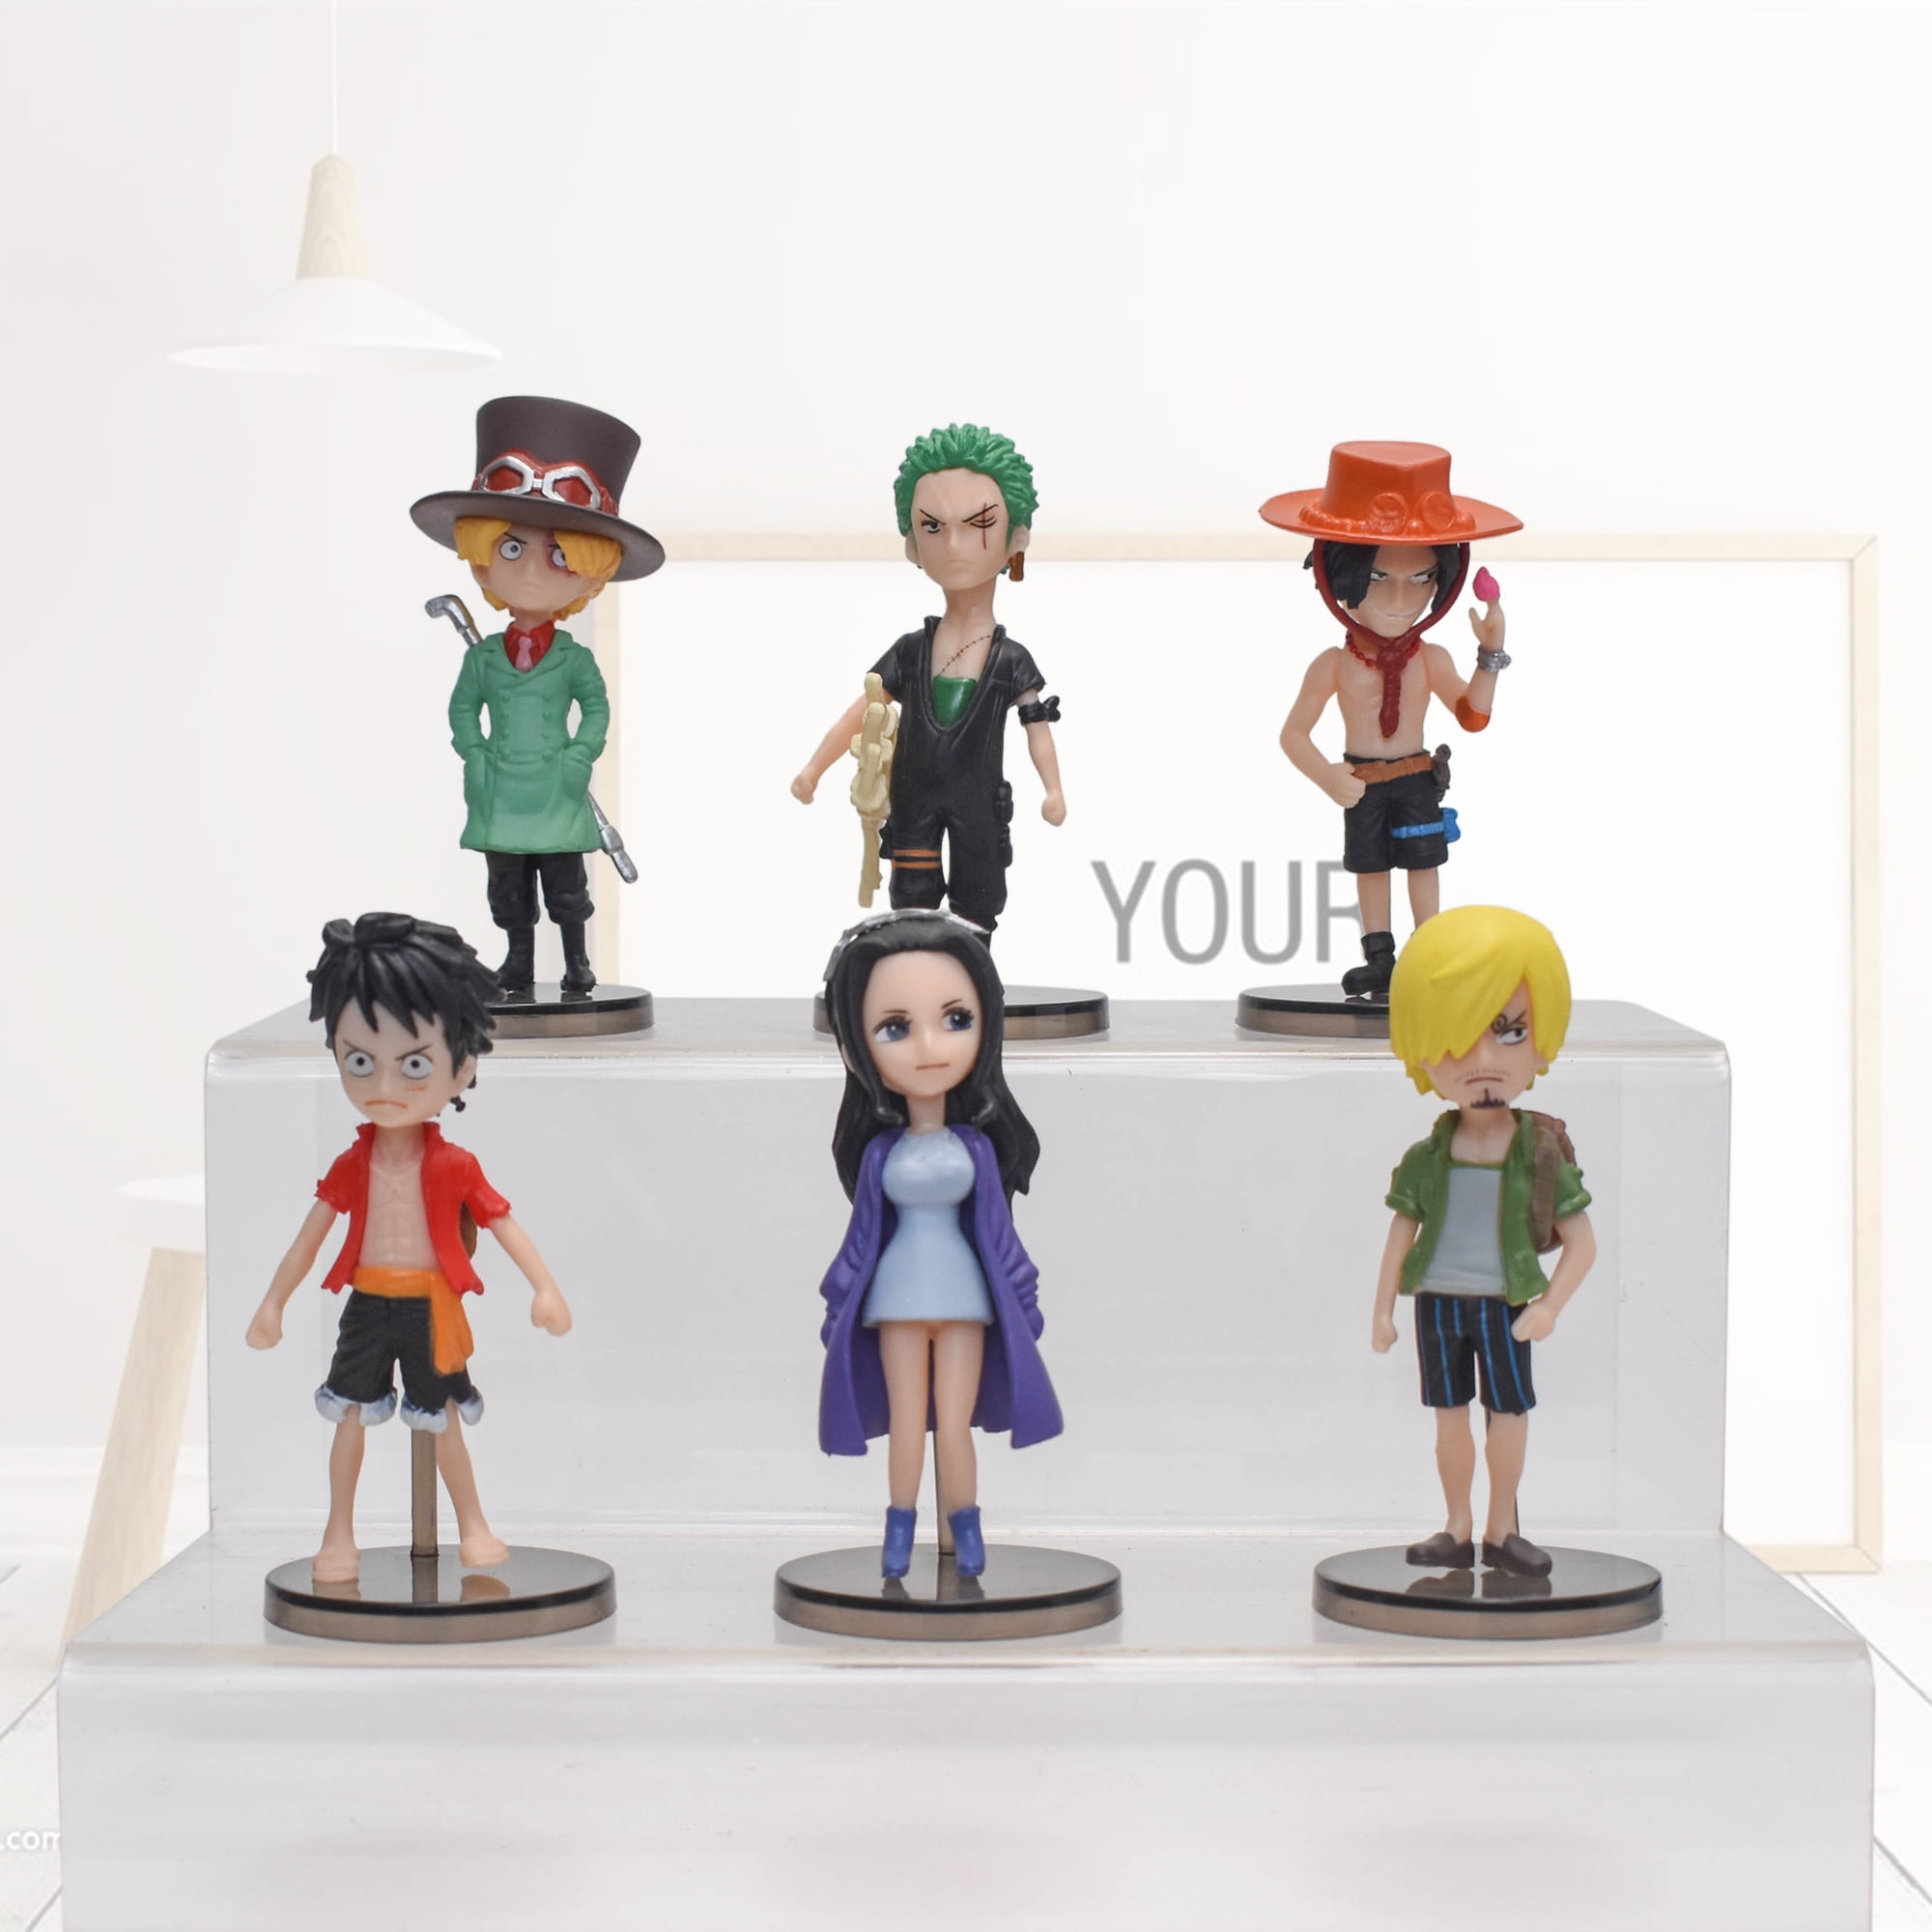 Anime Toys Collectible Doll Toy Gift For Anime Fans One Piece Anime Roronoa Zoro Luffy Figure Sanji Sabo Portgas D Ace Figurine Collectible Model Toy-2Action Figure Pvc Model Figure Toy Doll For